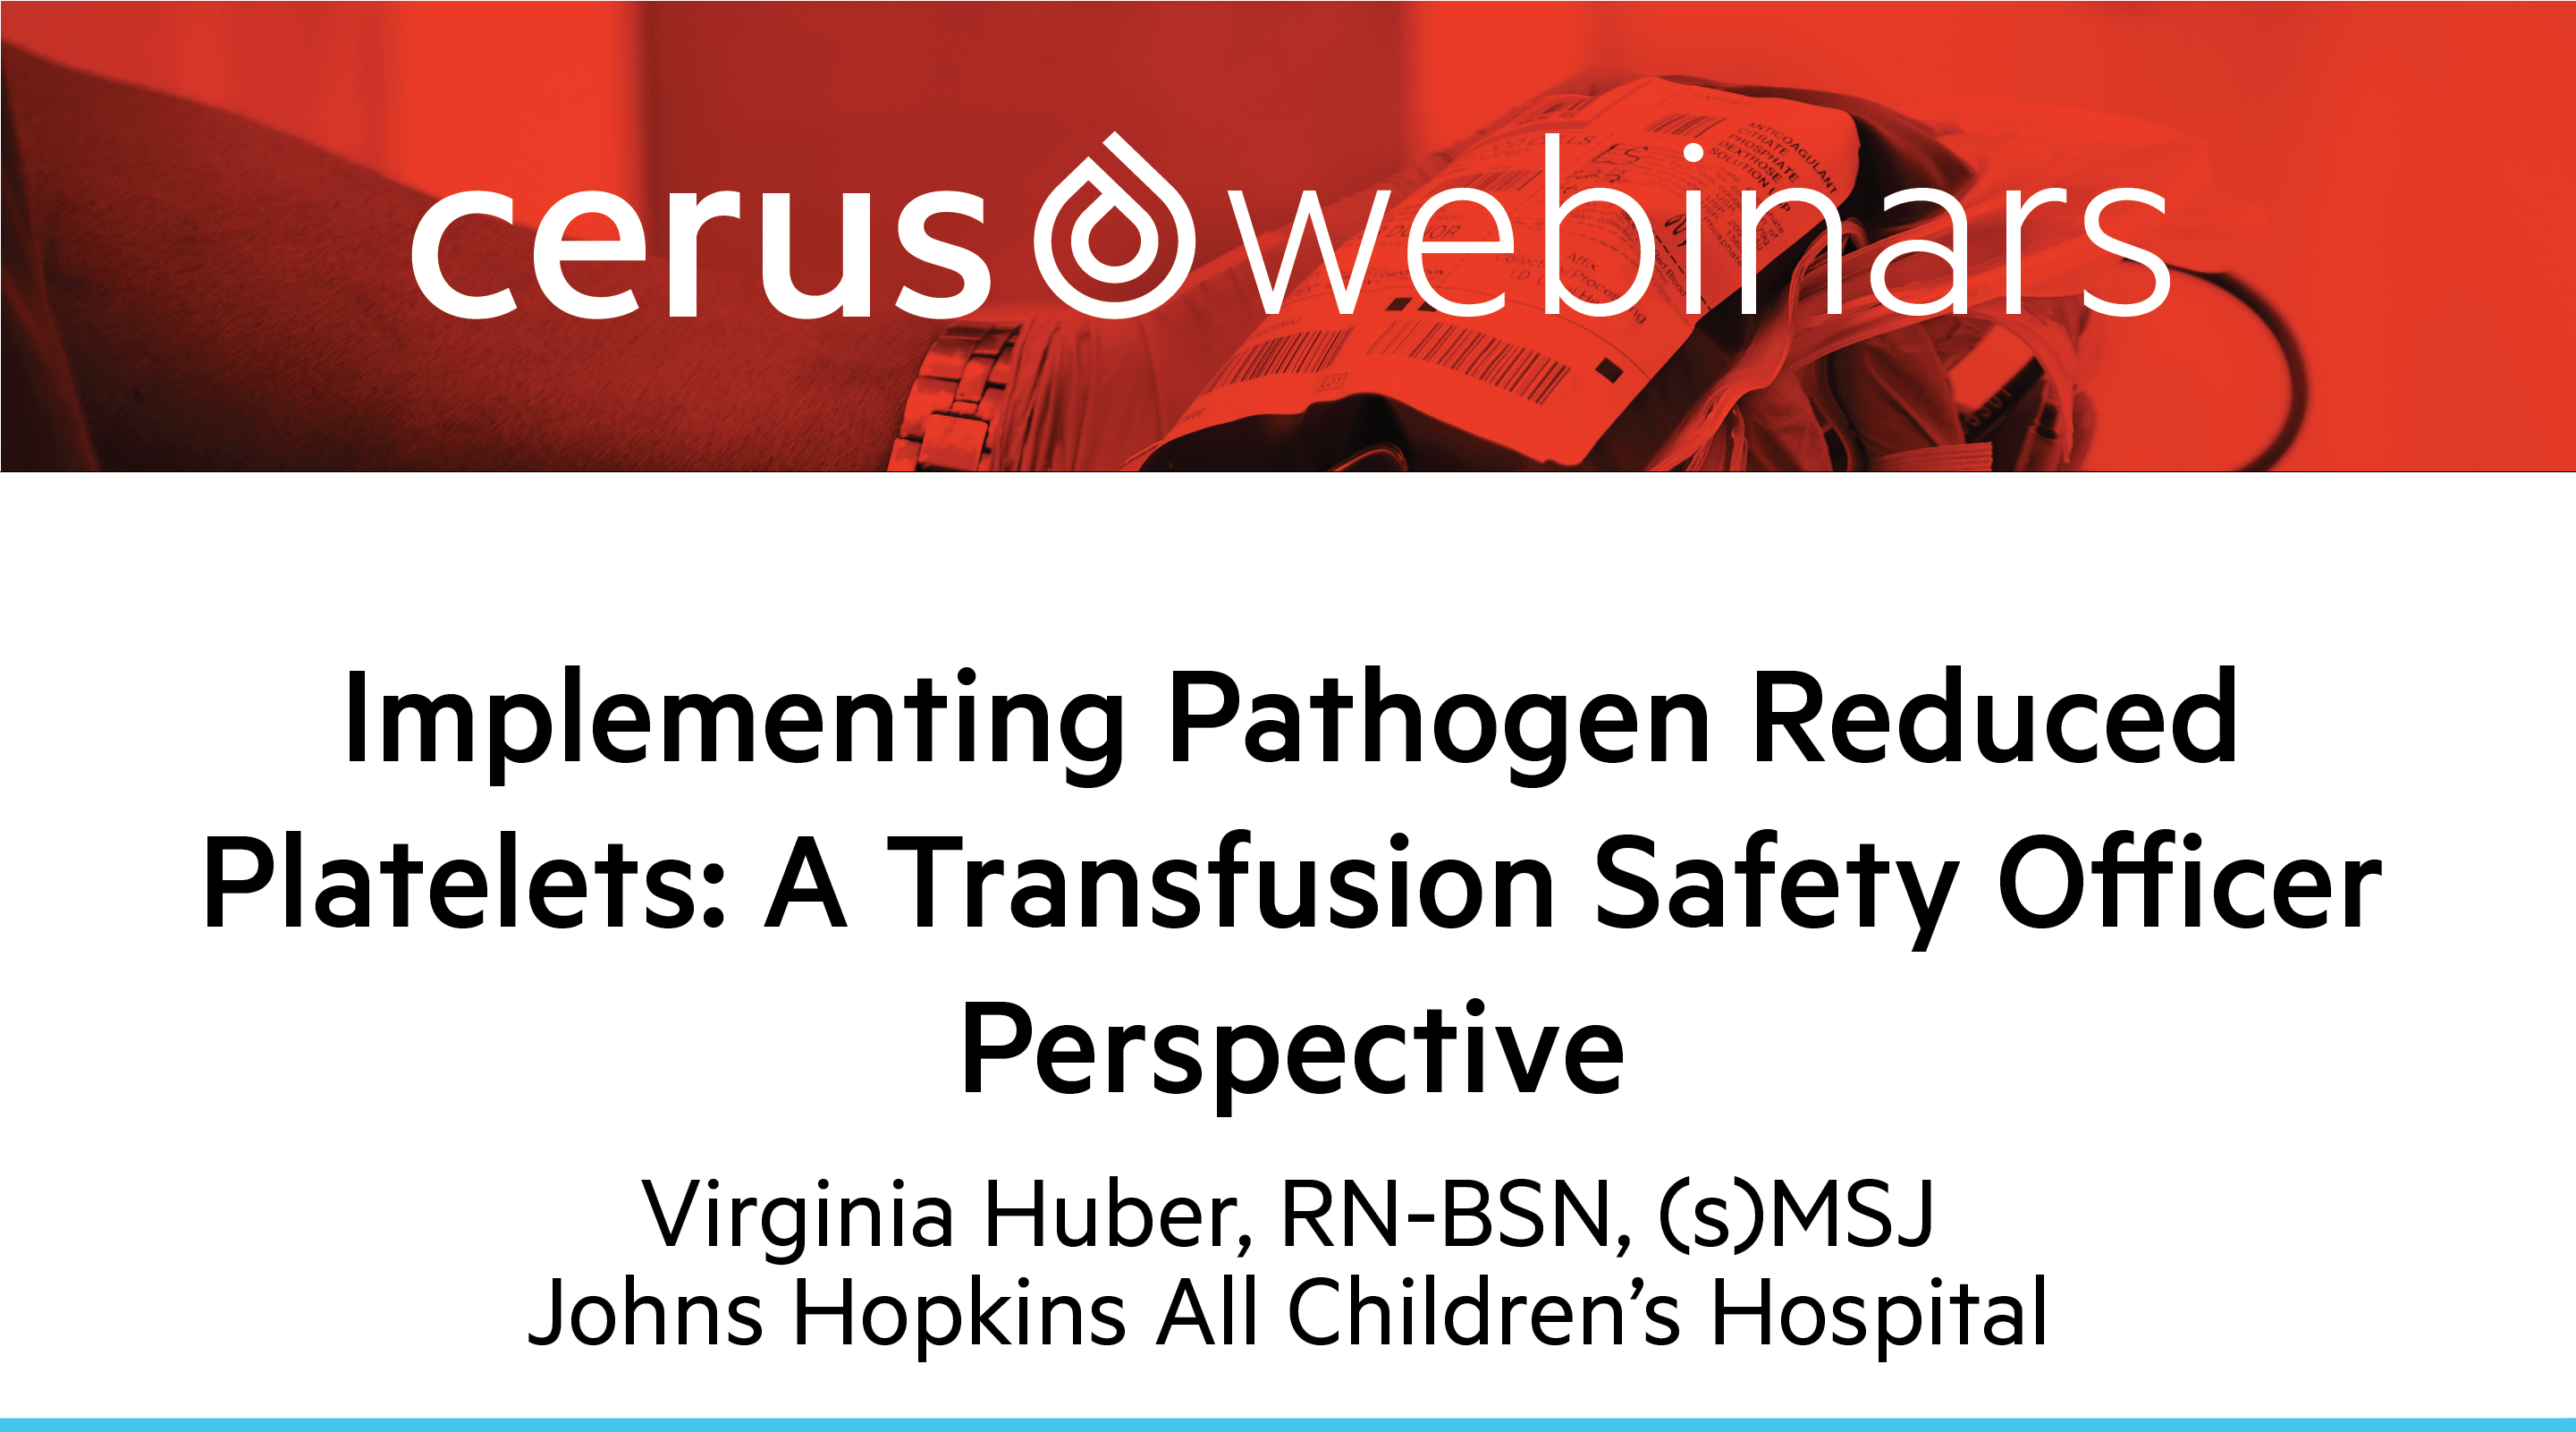 Implementing Pathogen Reduced Platelets: a Transfusion Safety Officer (TSO) Perspective -Huber